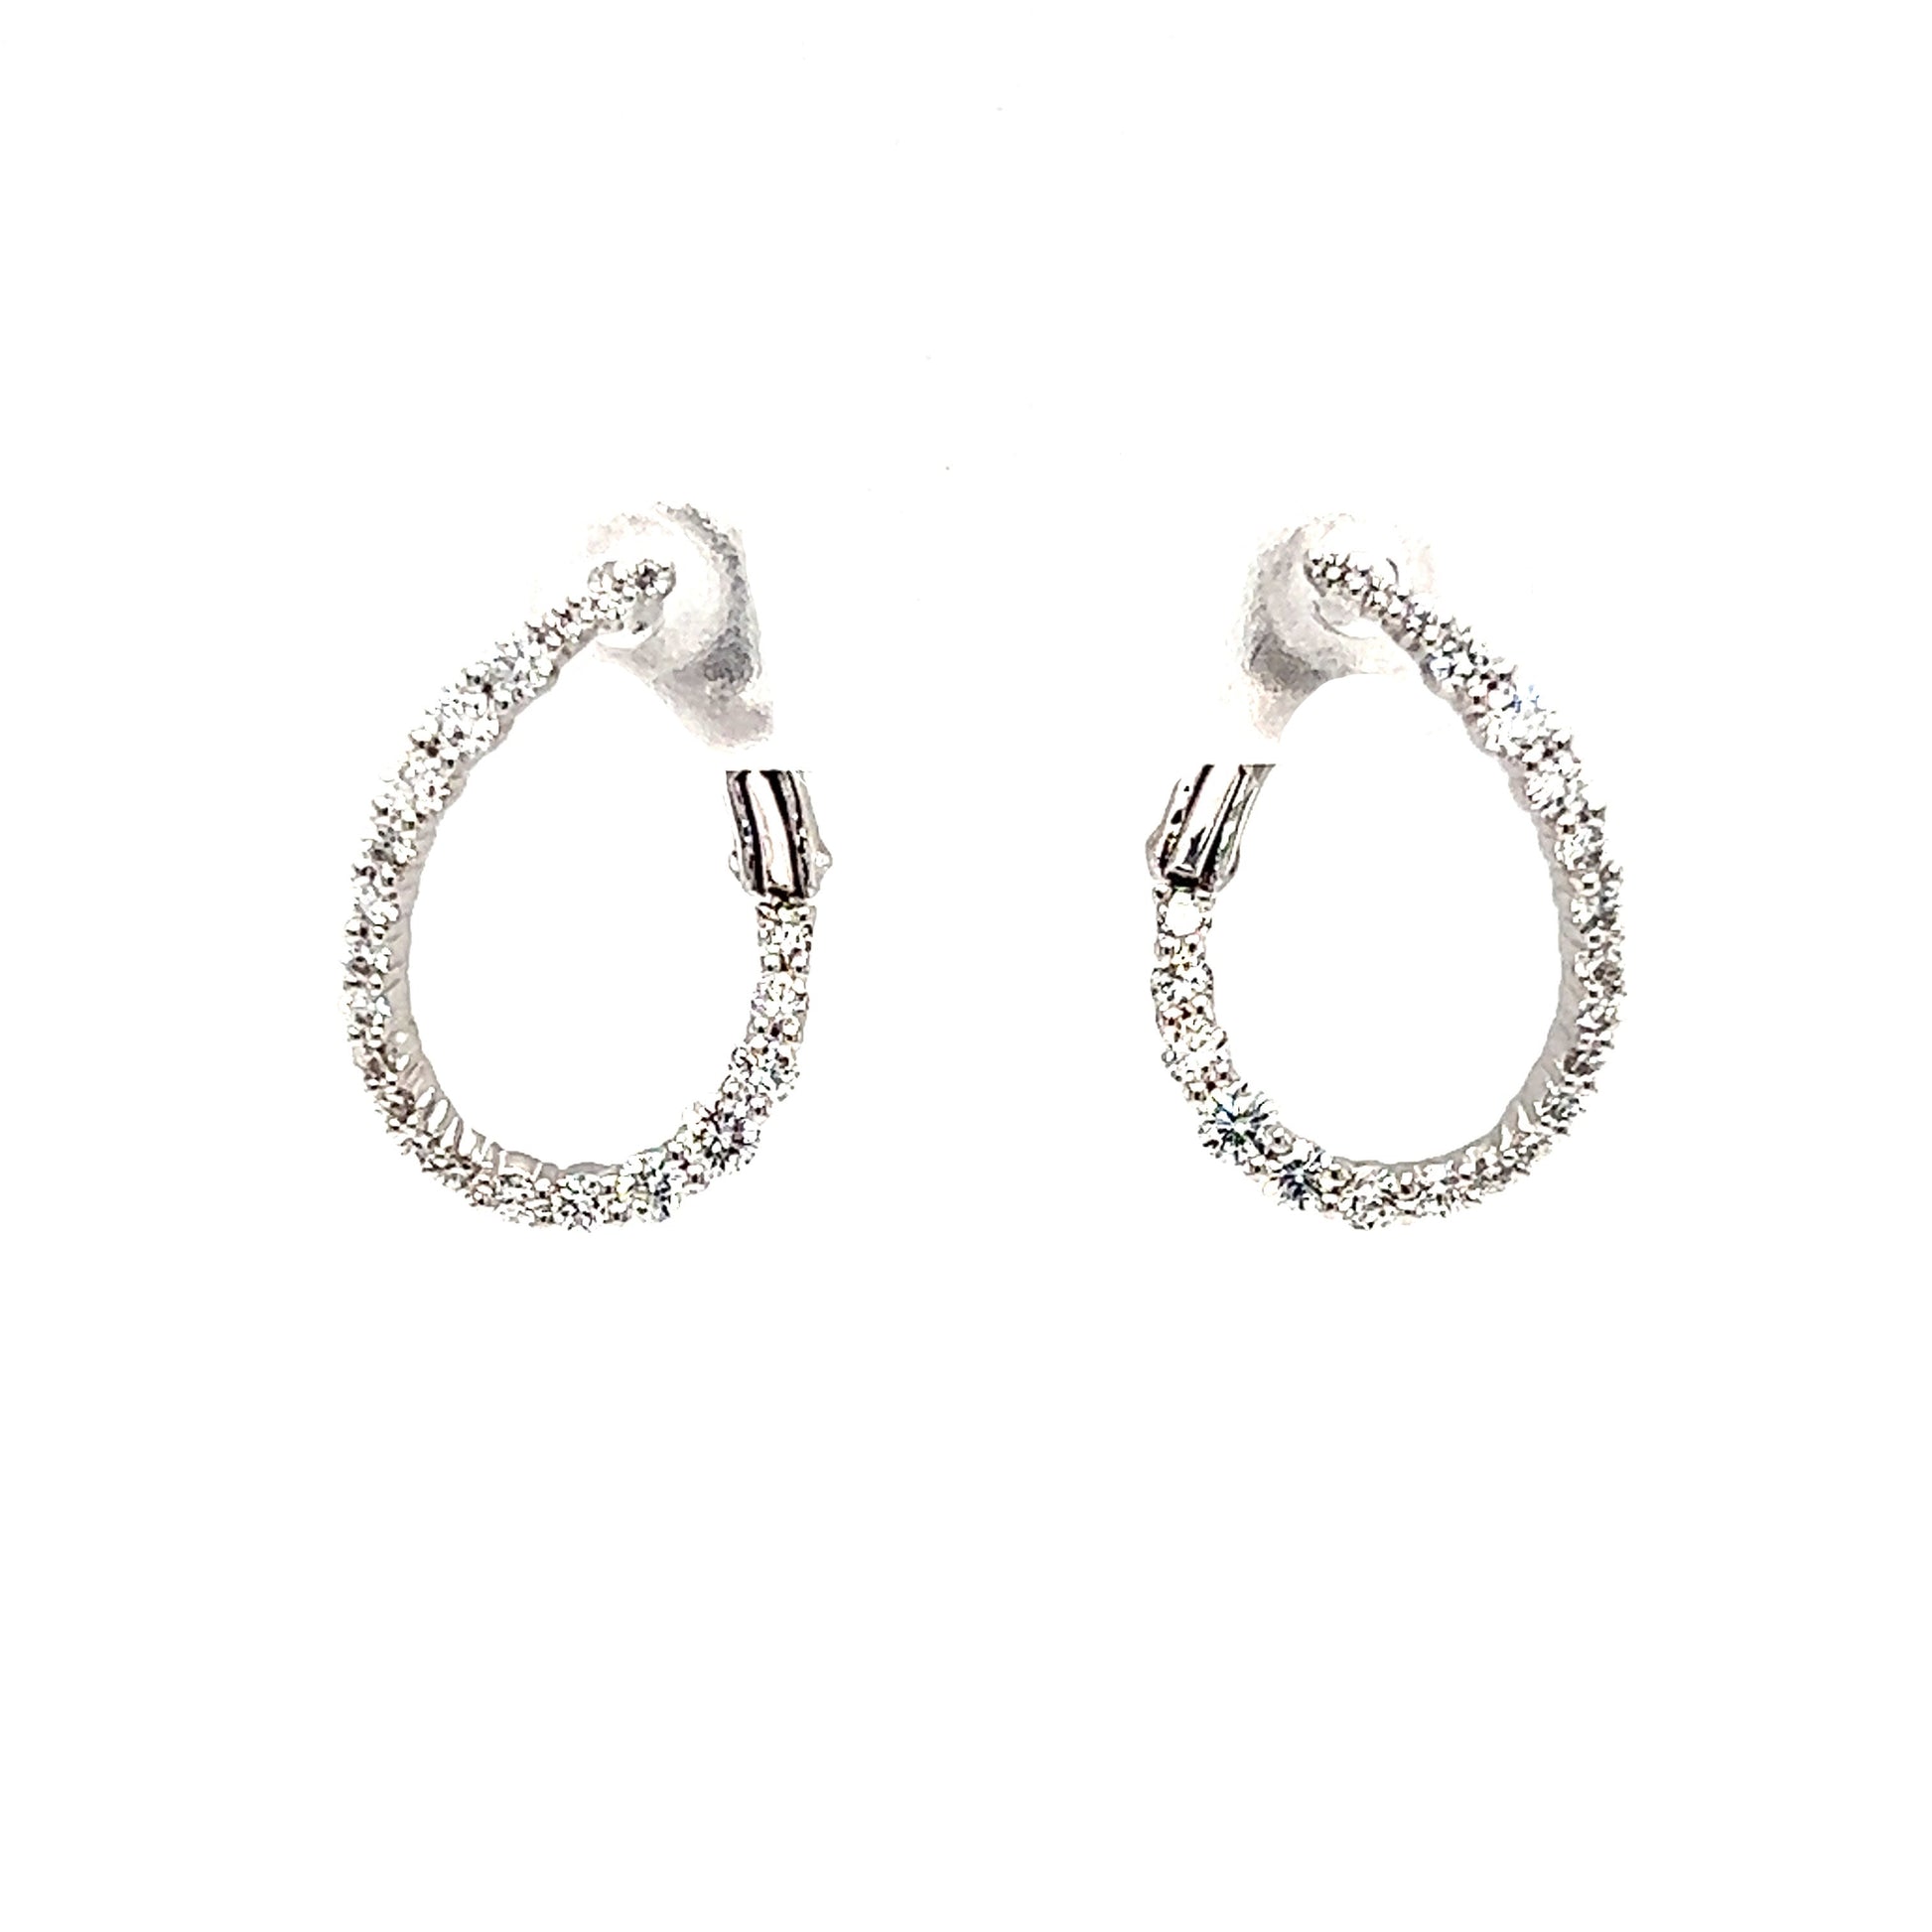 Swirled Diamond Hoop Earrings with 0.45ctw of Diamonds in 18K White Gold Front View on Display